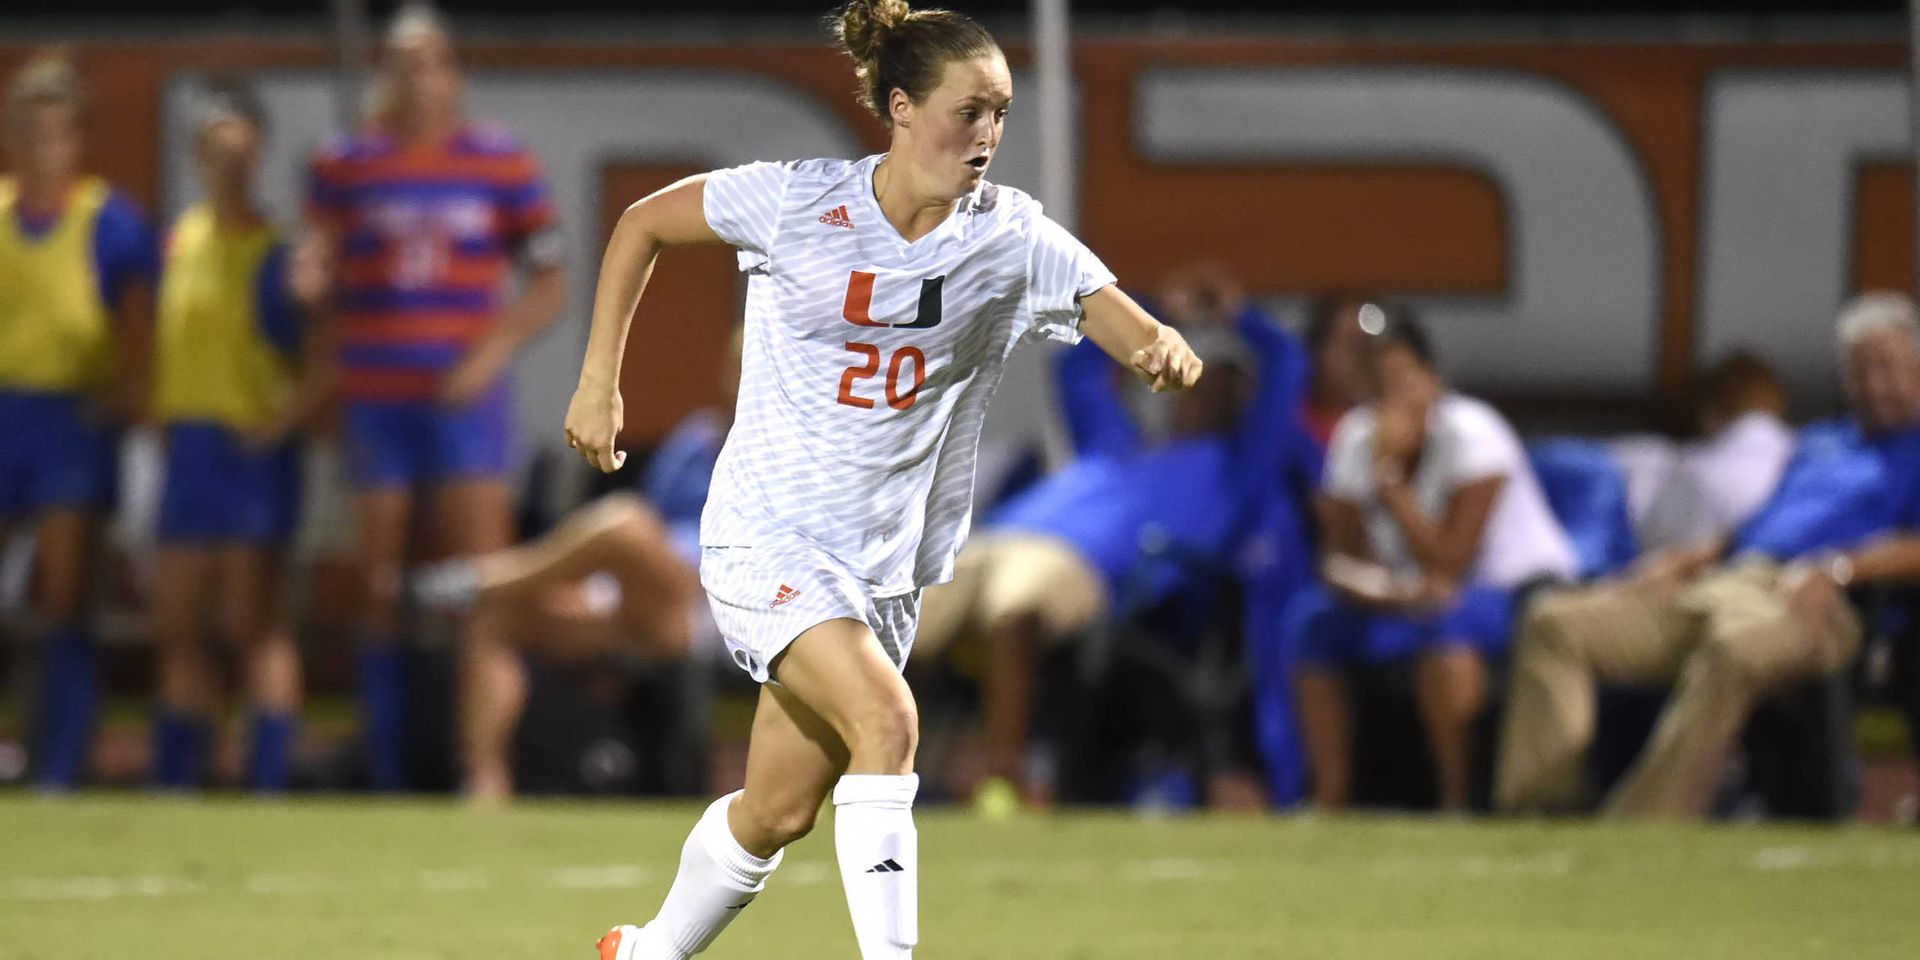 @CanesFutbol Drops Double OT Thriller to UCF